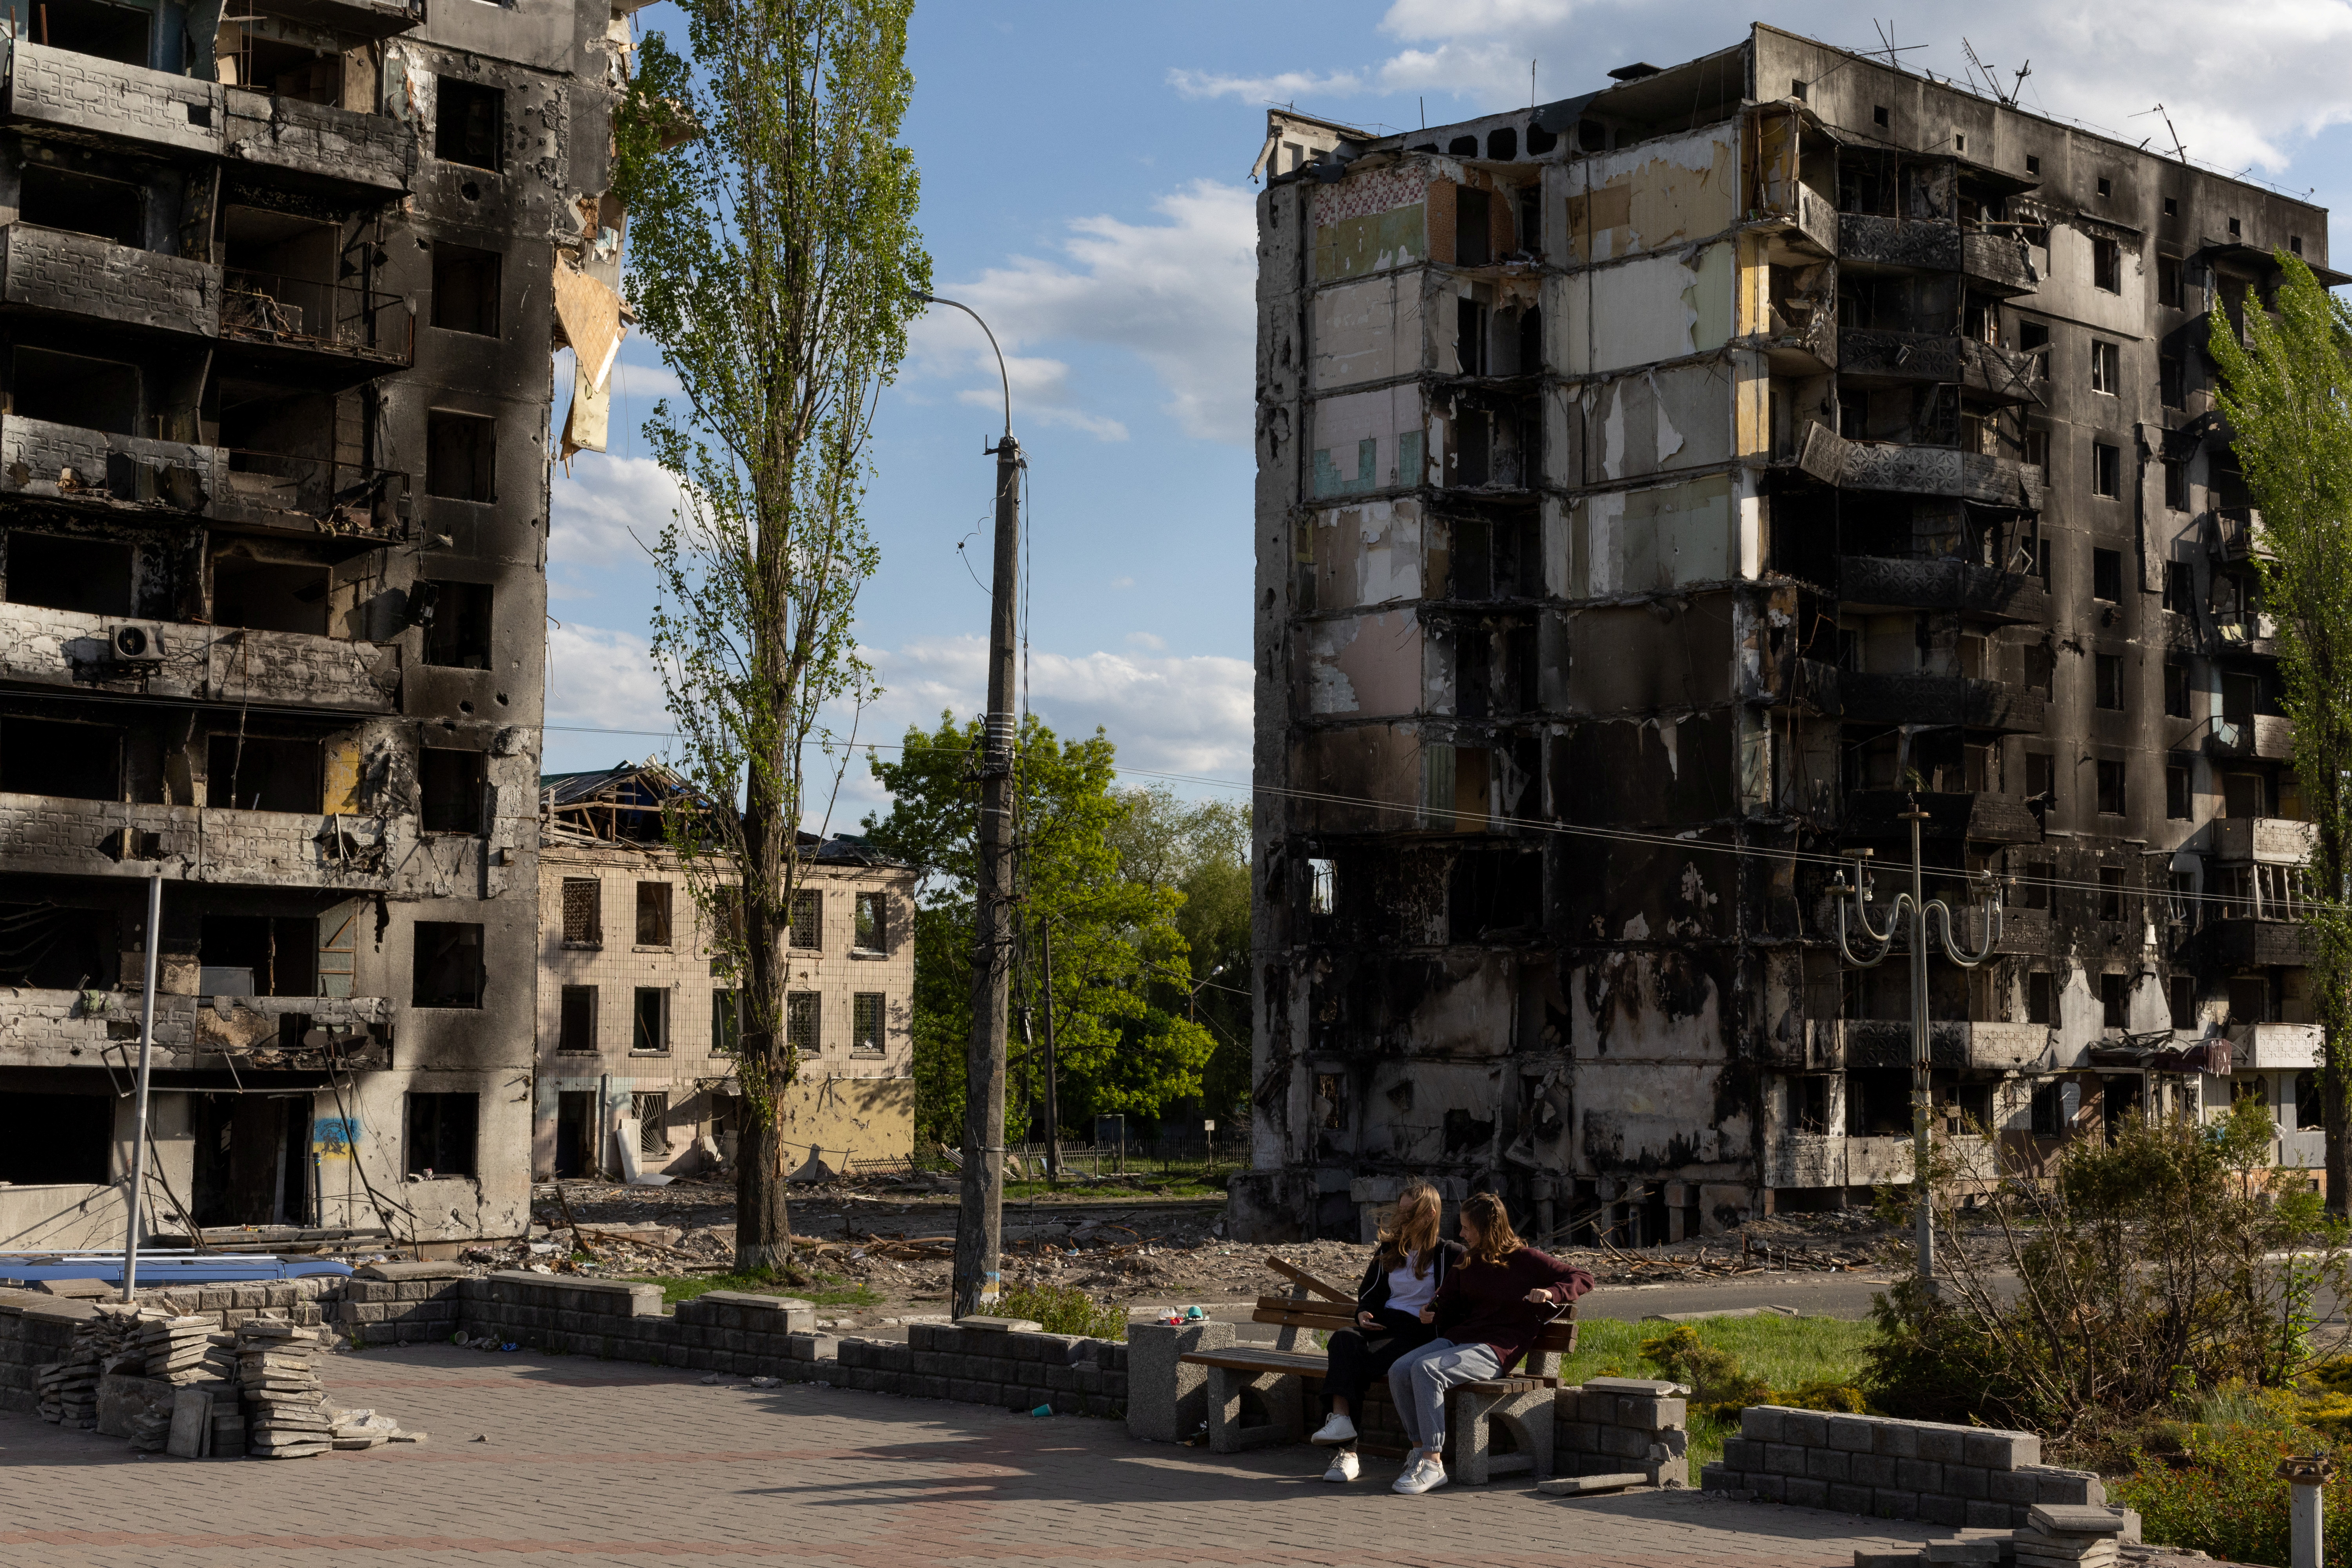 Two girls sit in a a public square in front of destroyed buildings amid Russia's invasion of Ukraine, in Borodyanka